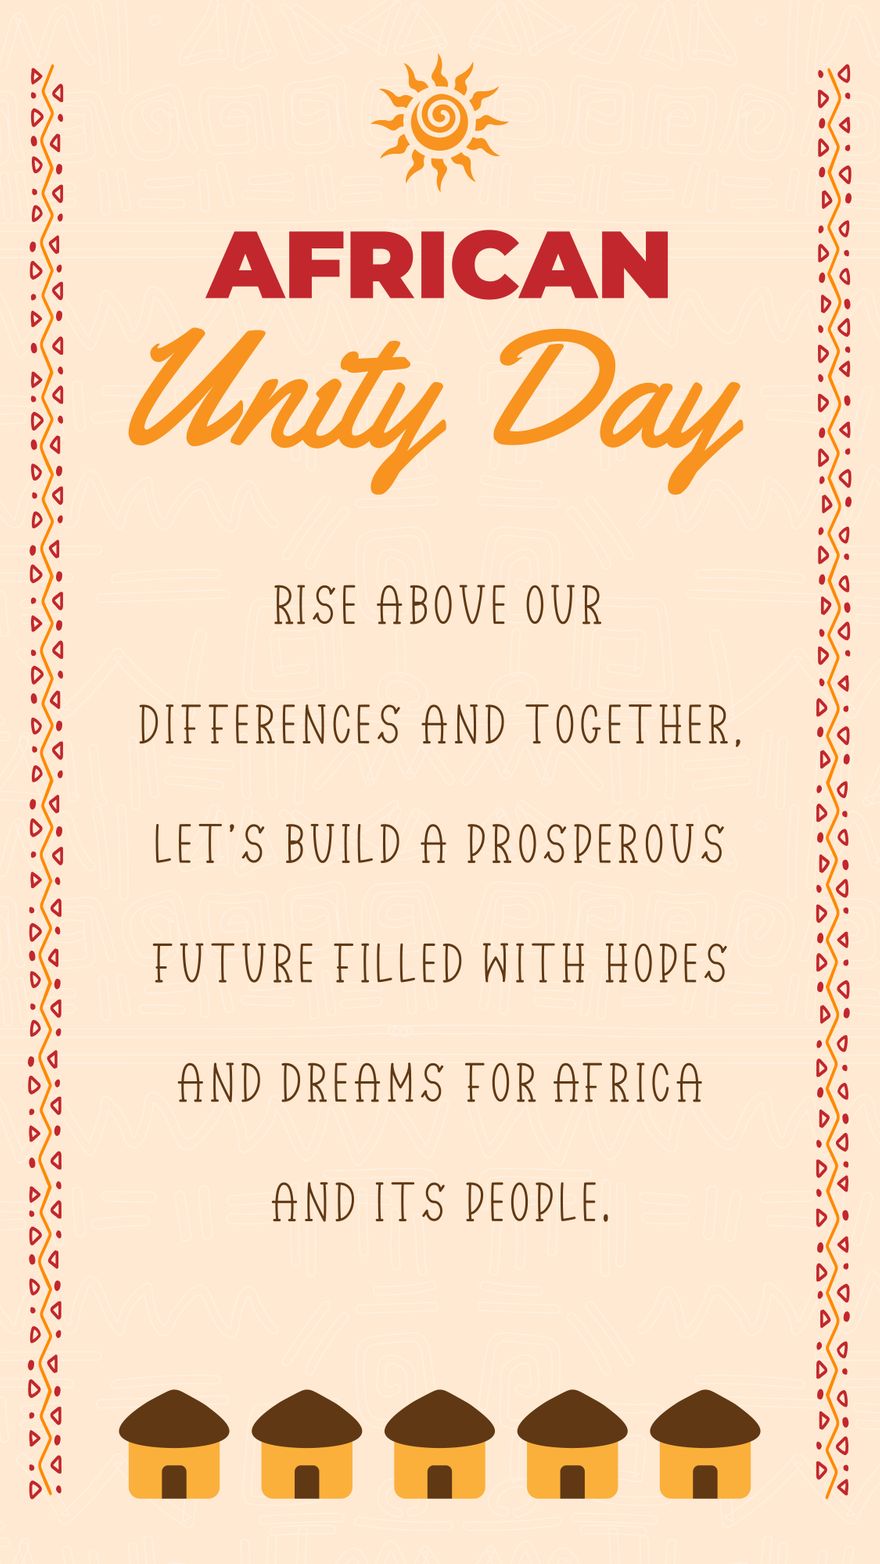 Free African Unity Day Whatsapp Status in Illustrator, PSD, EPS, SVG, PNG, JPEG